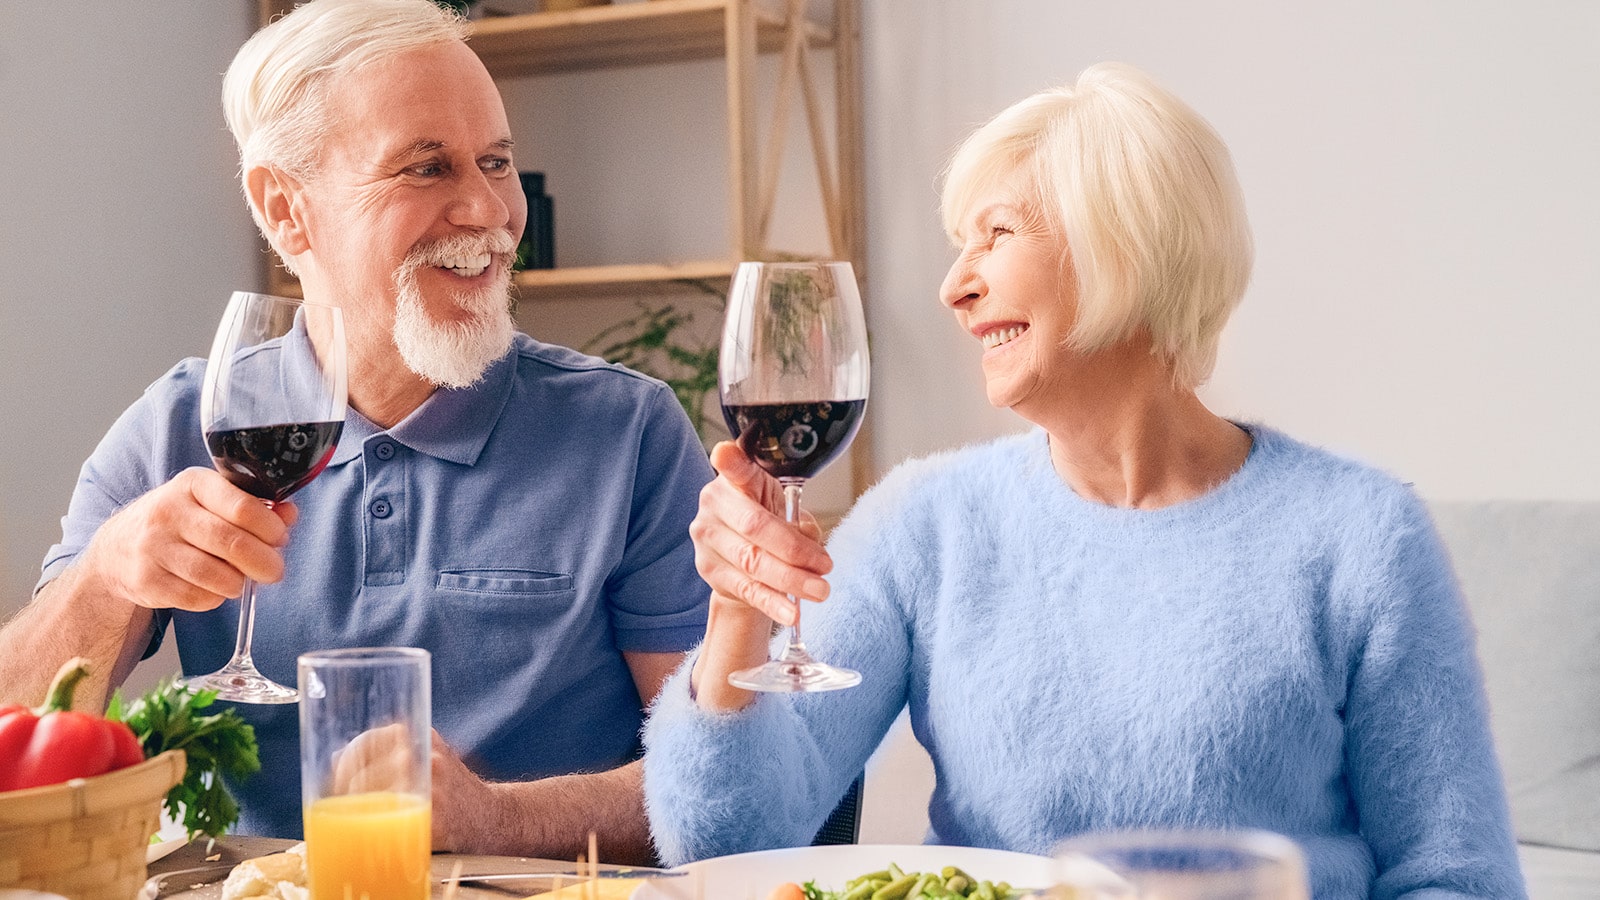 Senior woman and man wearing blue holding up wine glasses at dinner